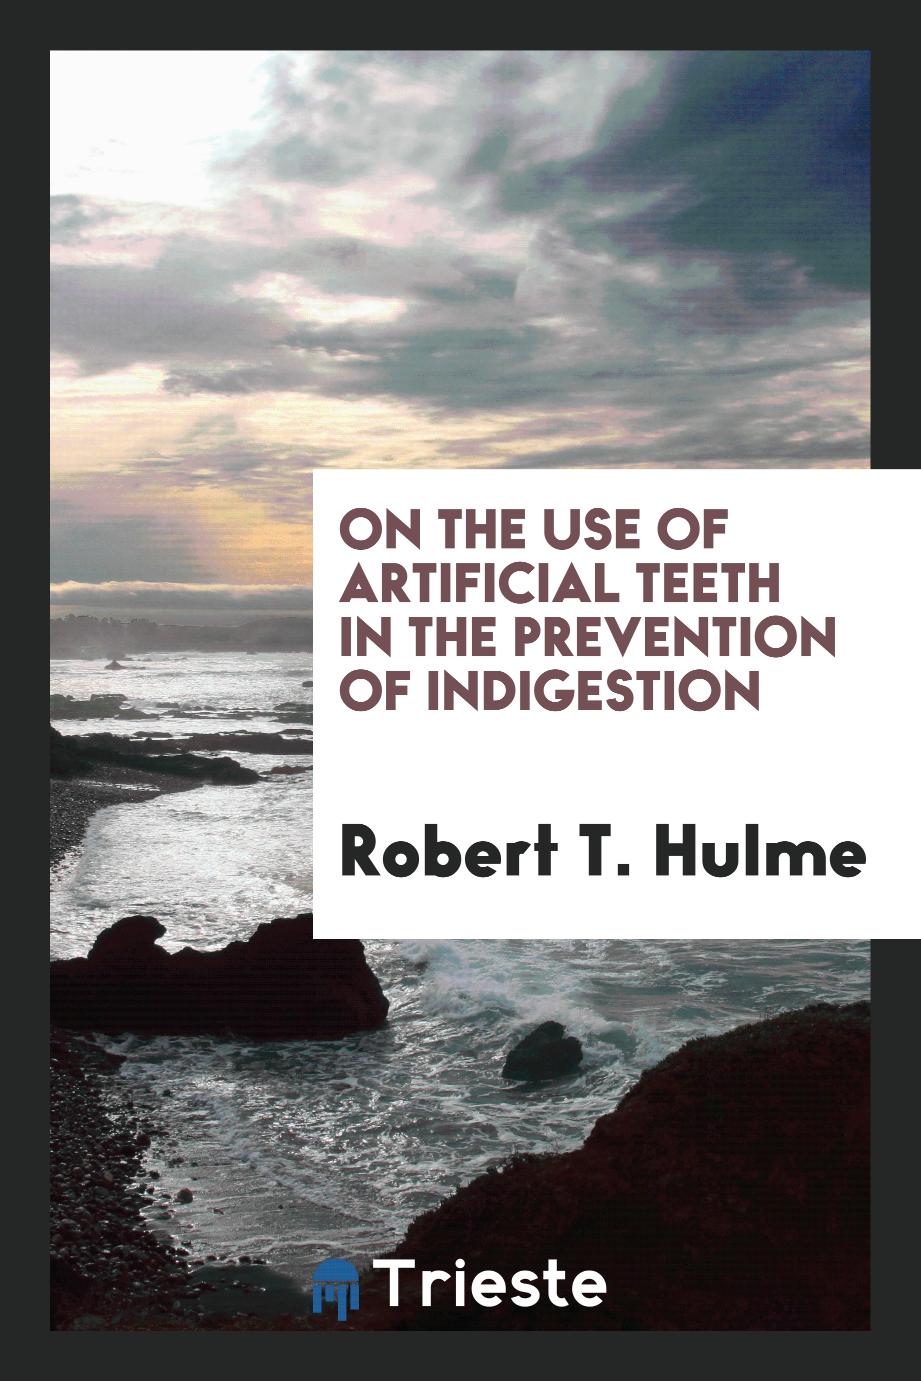 On the Use of Artificial Teeth in the Prevention of Indigestion